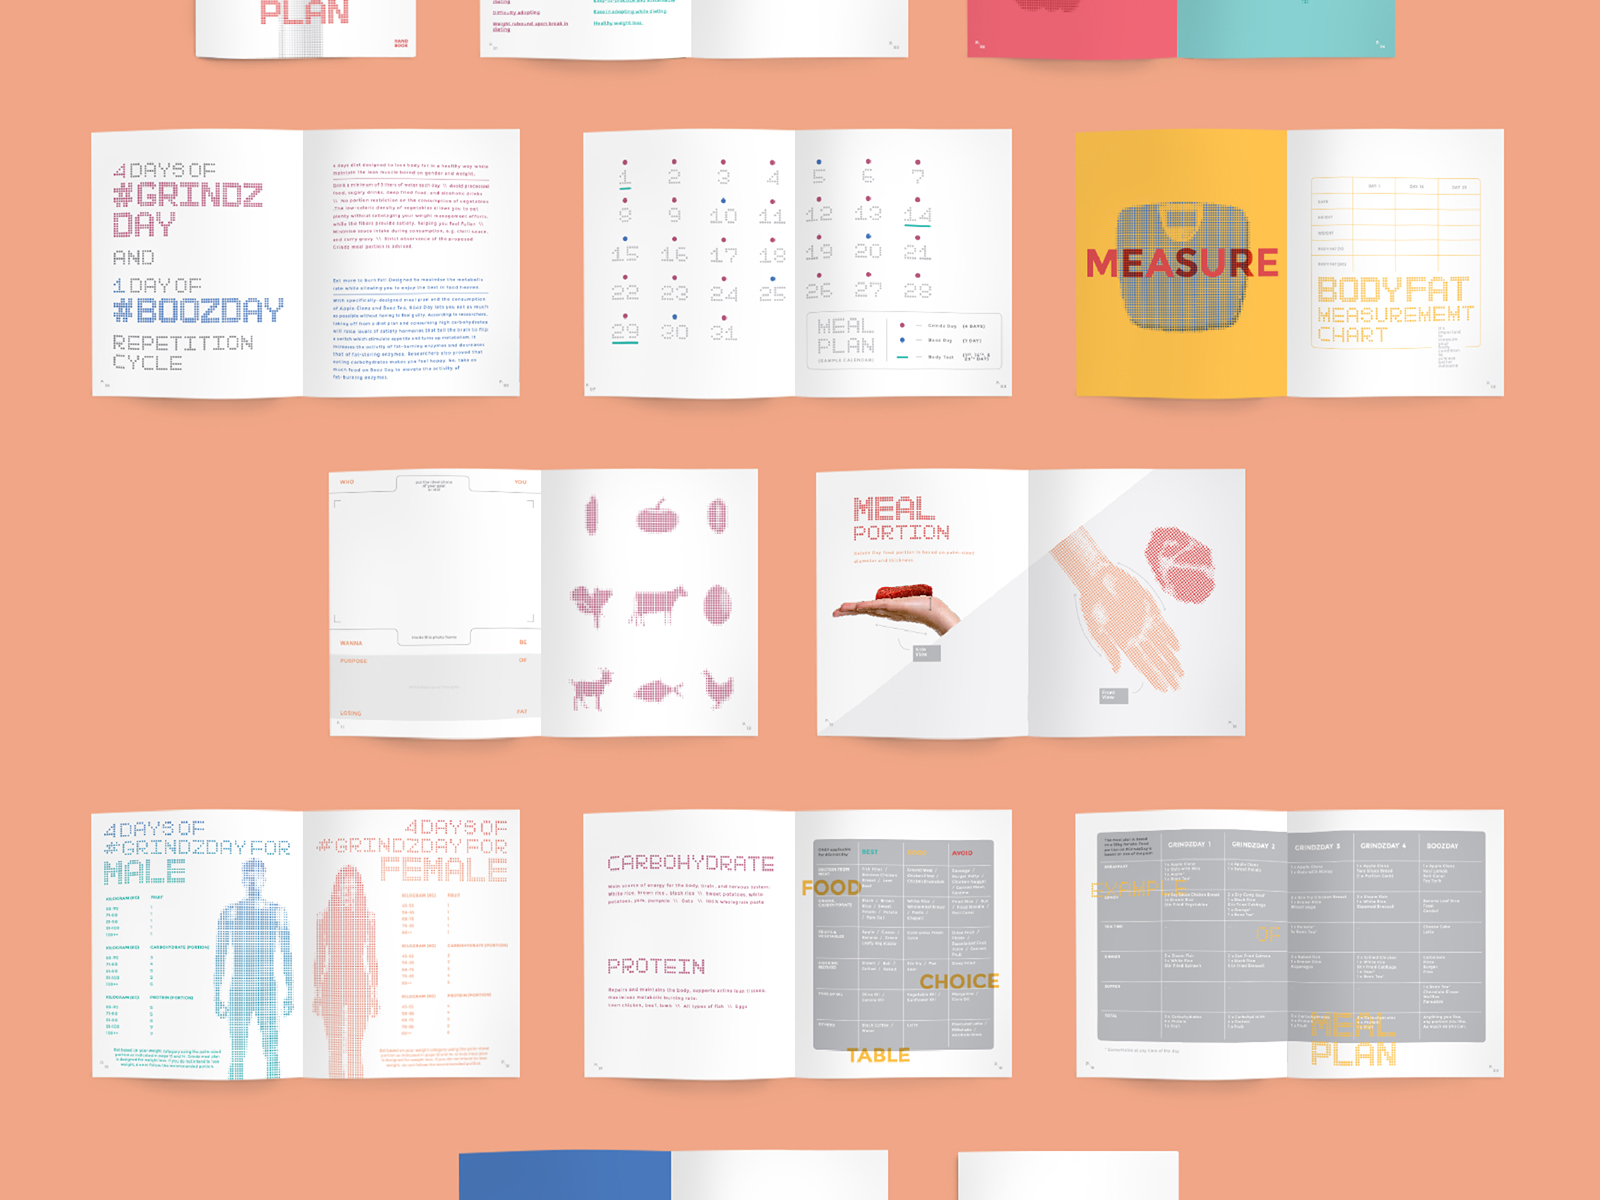 Grindz supplement brand collaterals design of guidebook inner pages of information of nutrition and weight loss alongside schedule for food consumption